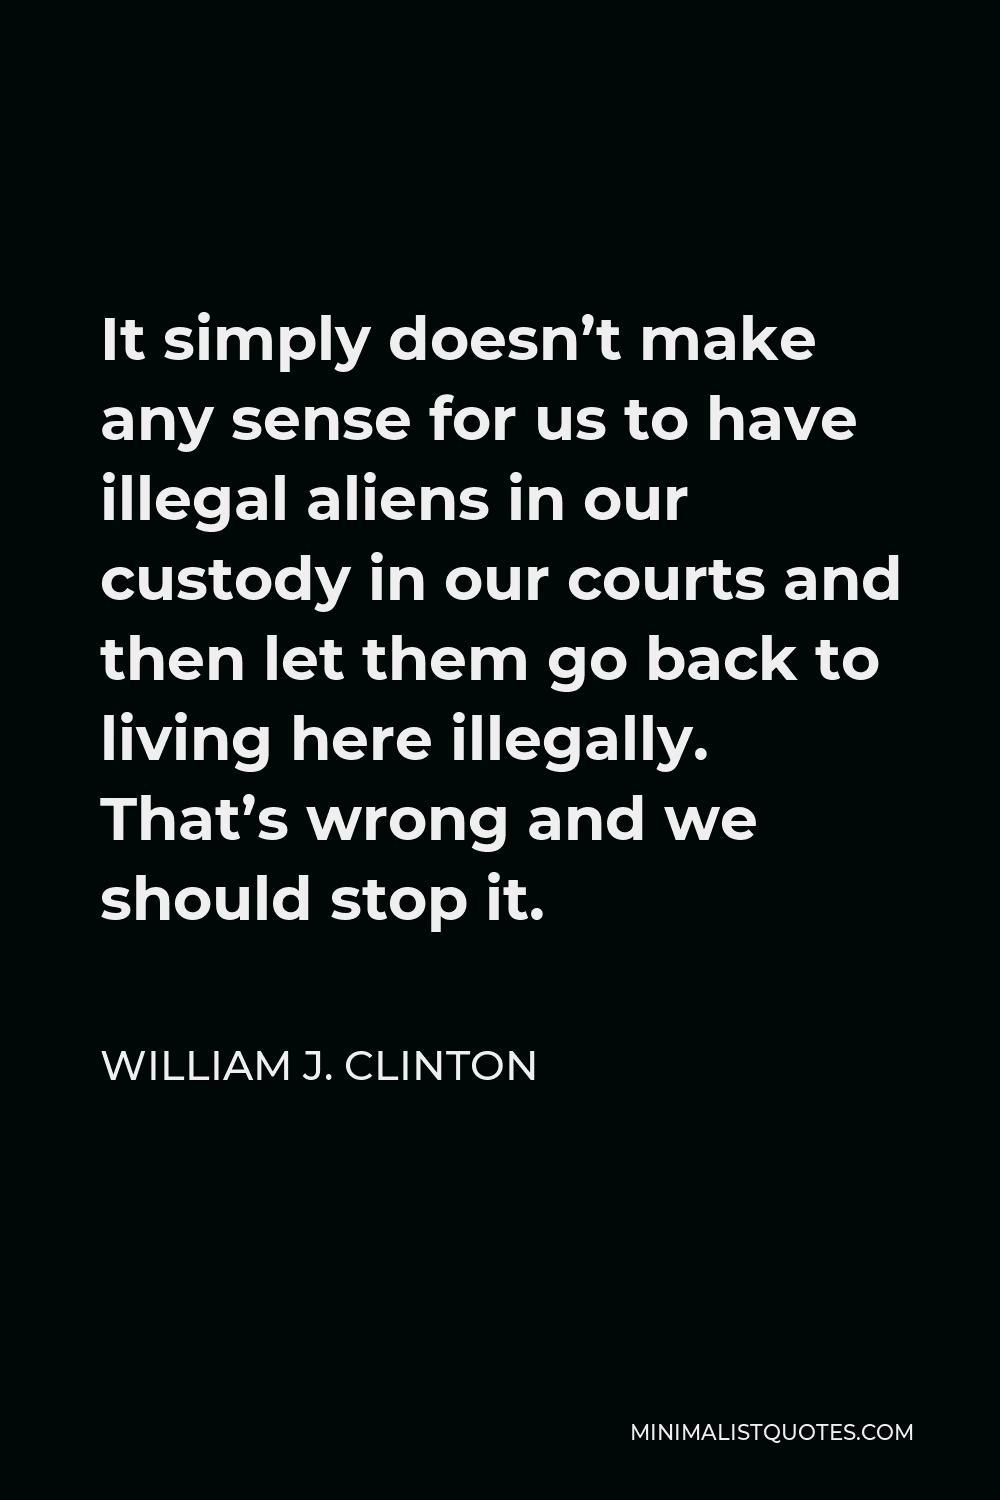 William J. Clinton Quote - It simply doesn’t make any sense for us to have illegal aliens in our custody in our courts and then let them go back to living here illegally. That’s wrong and we should stop it.